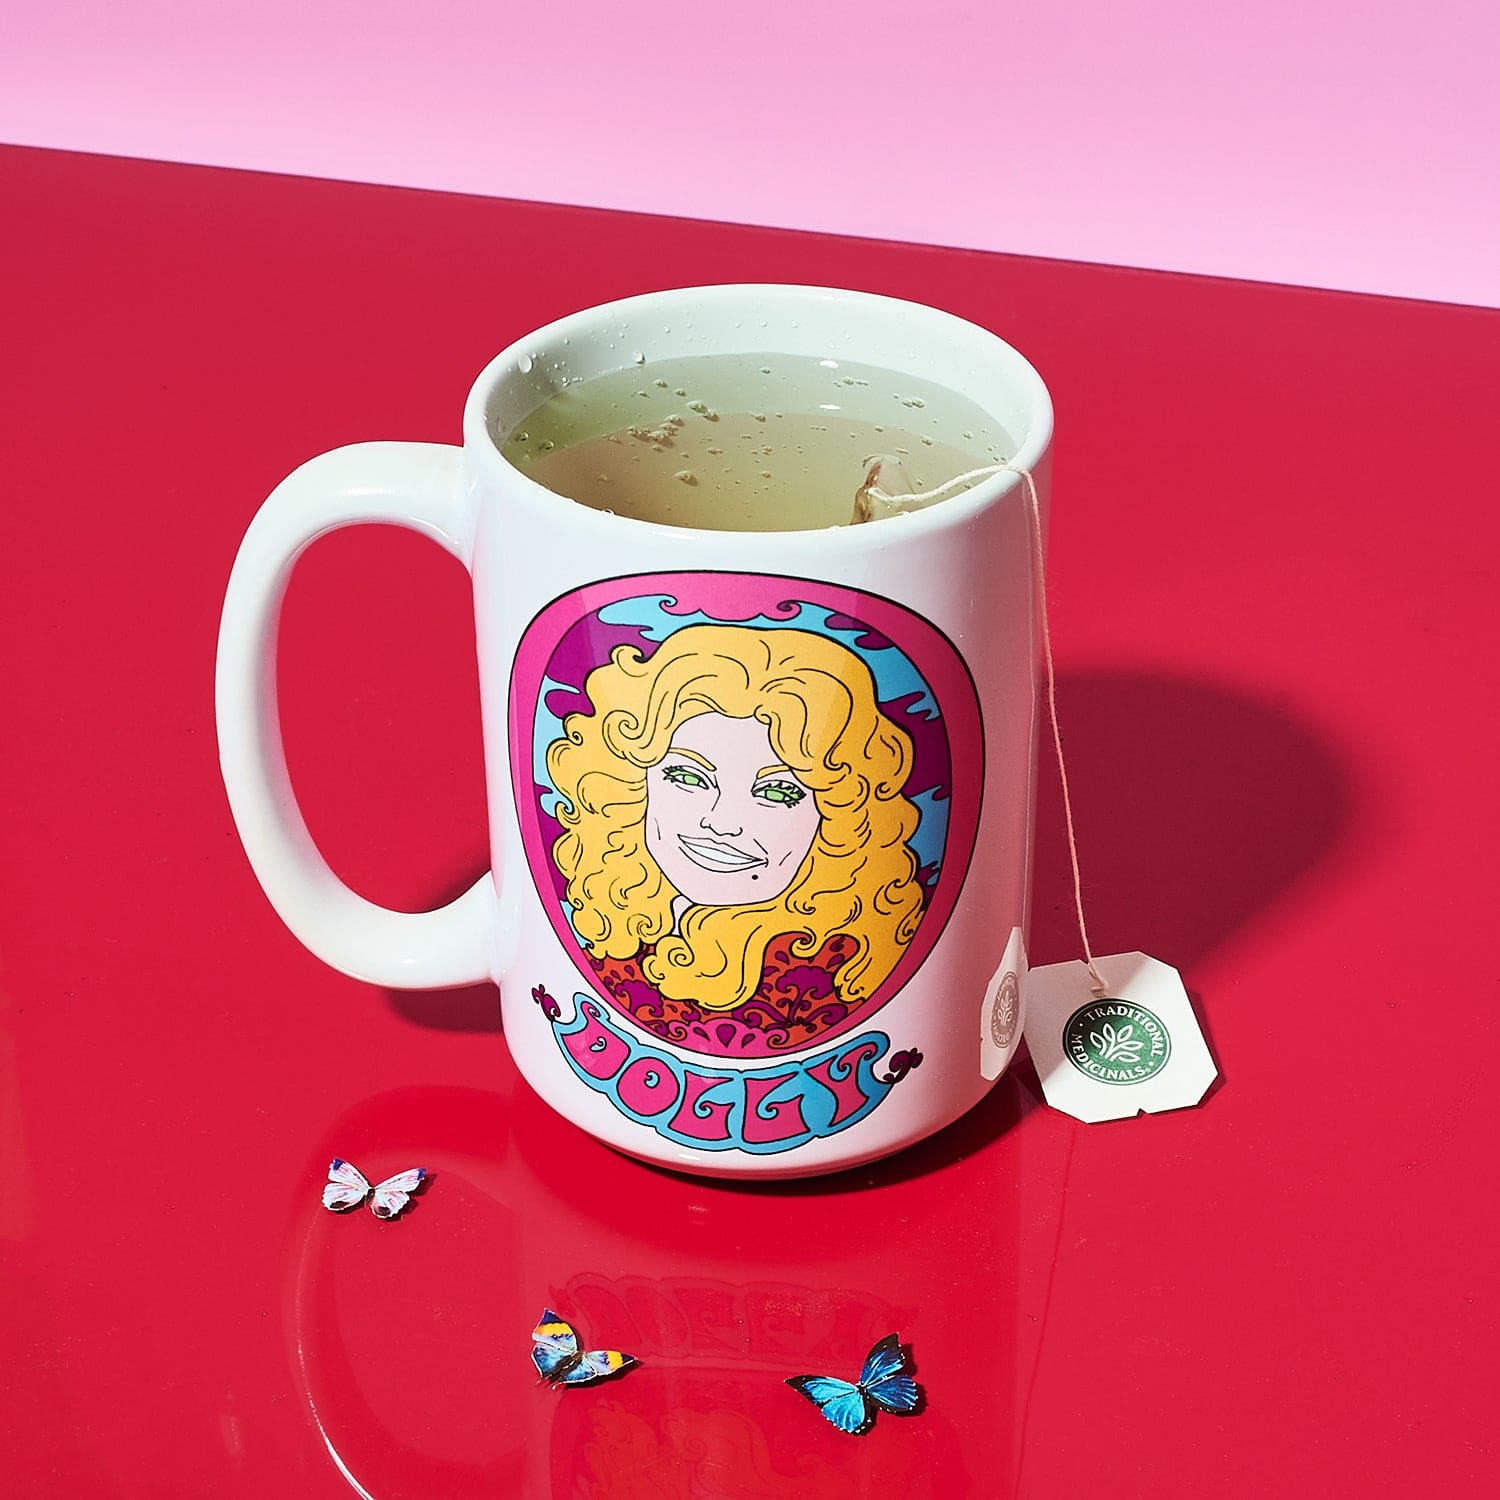 Dolly Parton Portrait Mug 0822 - Astral Weekend - Back To 